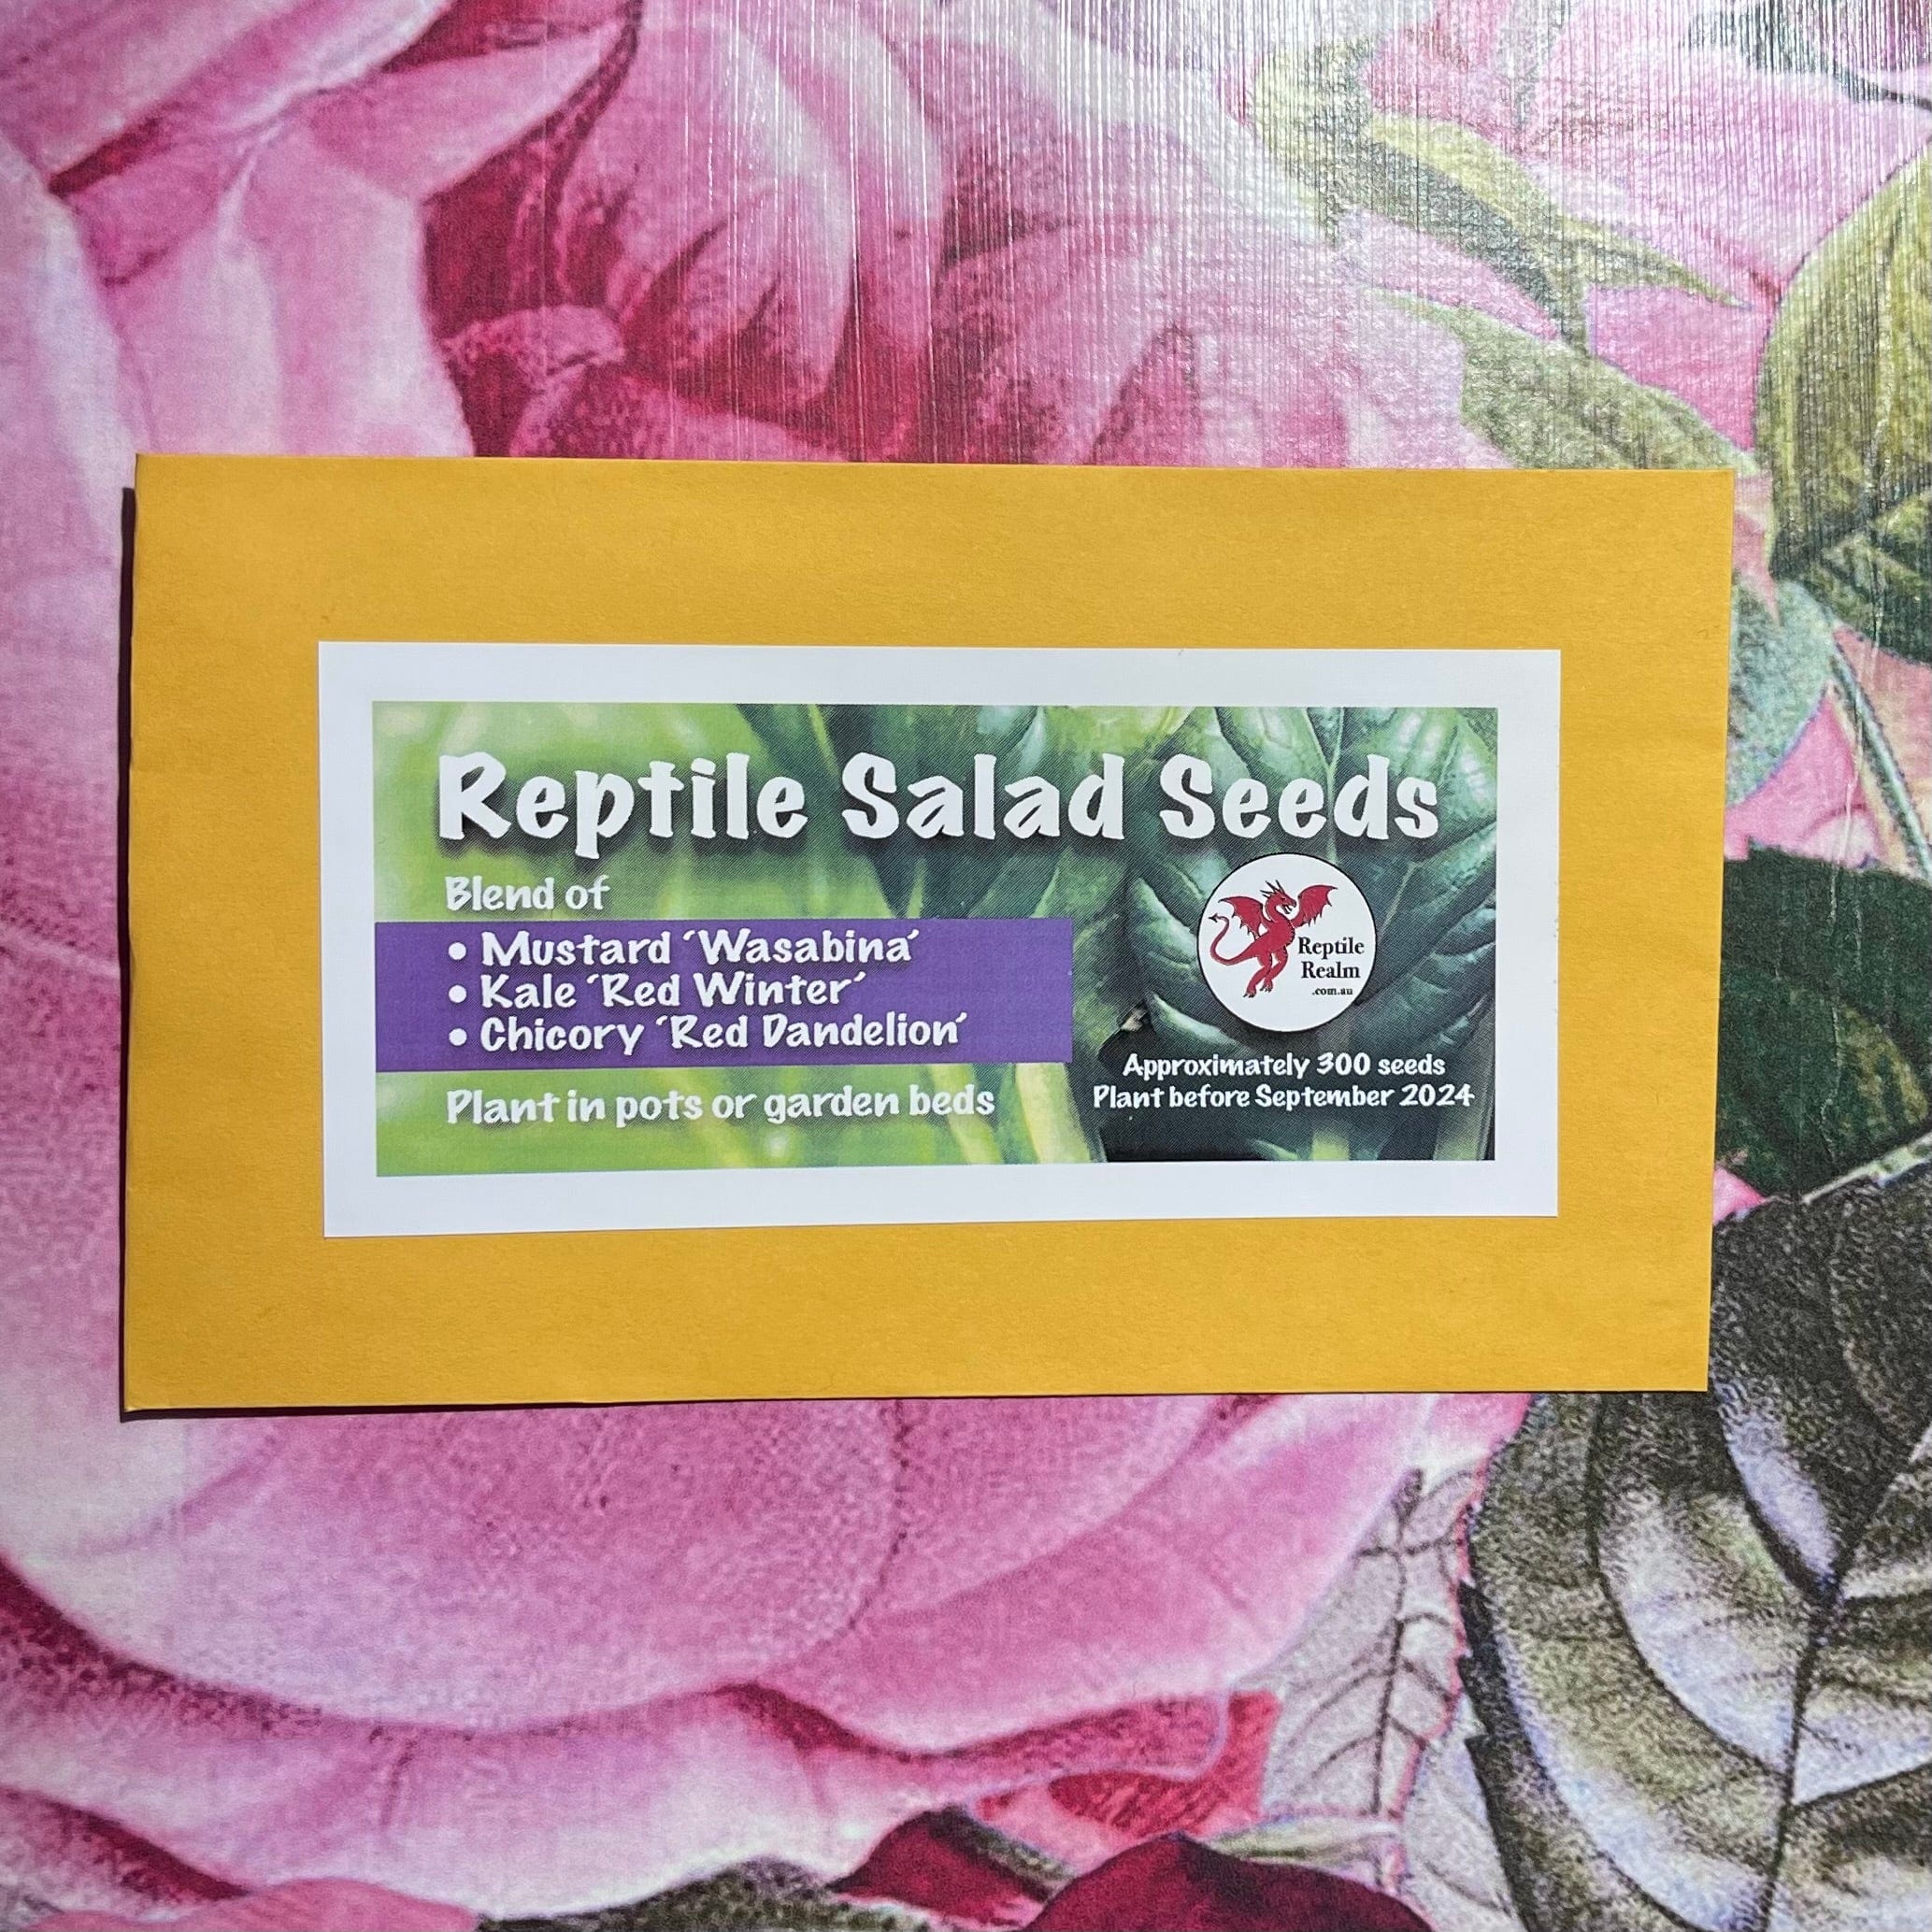 Reptile Realm Seed Blend Reptile Salad Seeds (Purple Label) - Mustard, Kale and Chicory